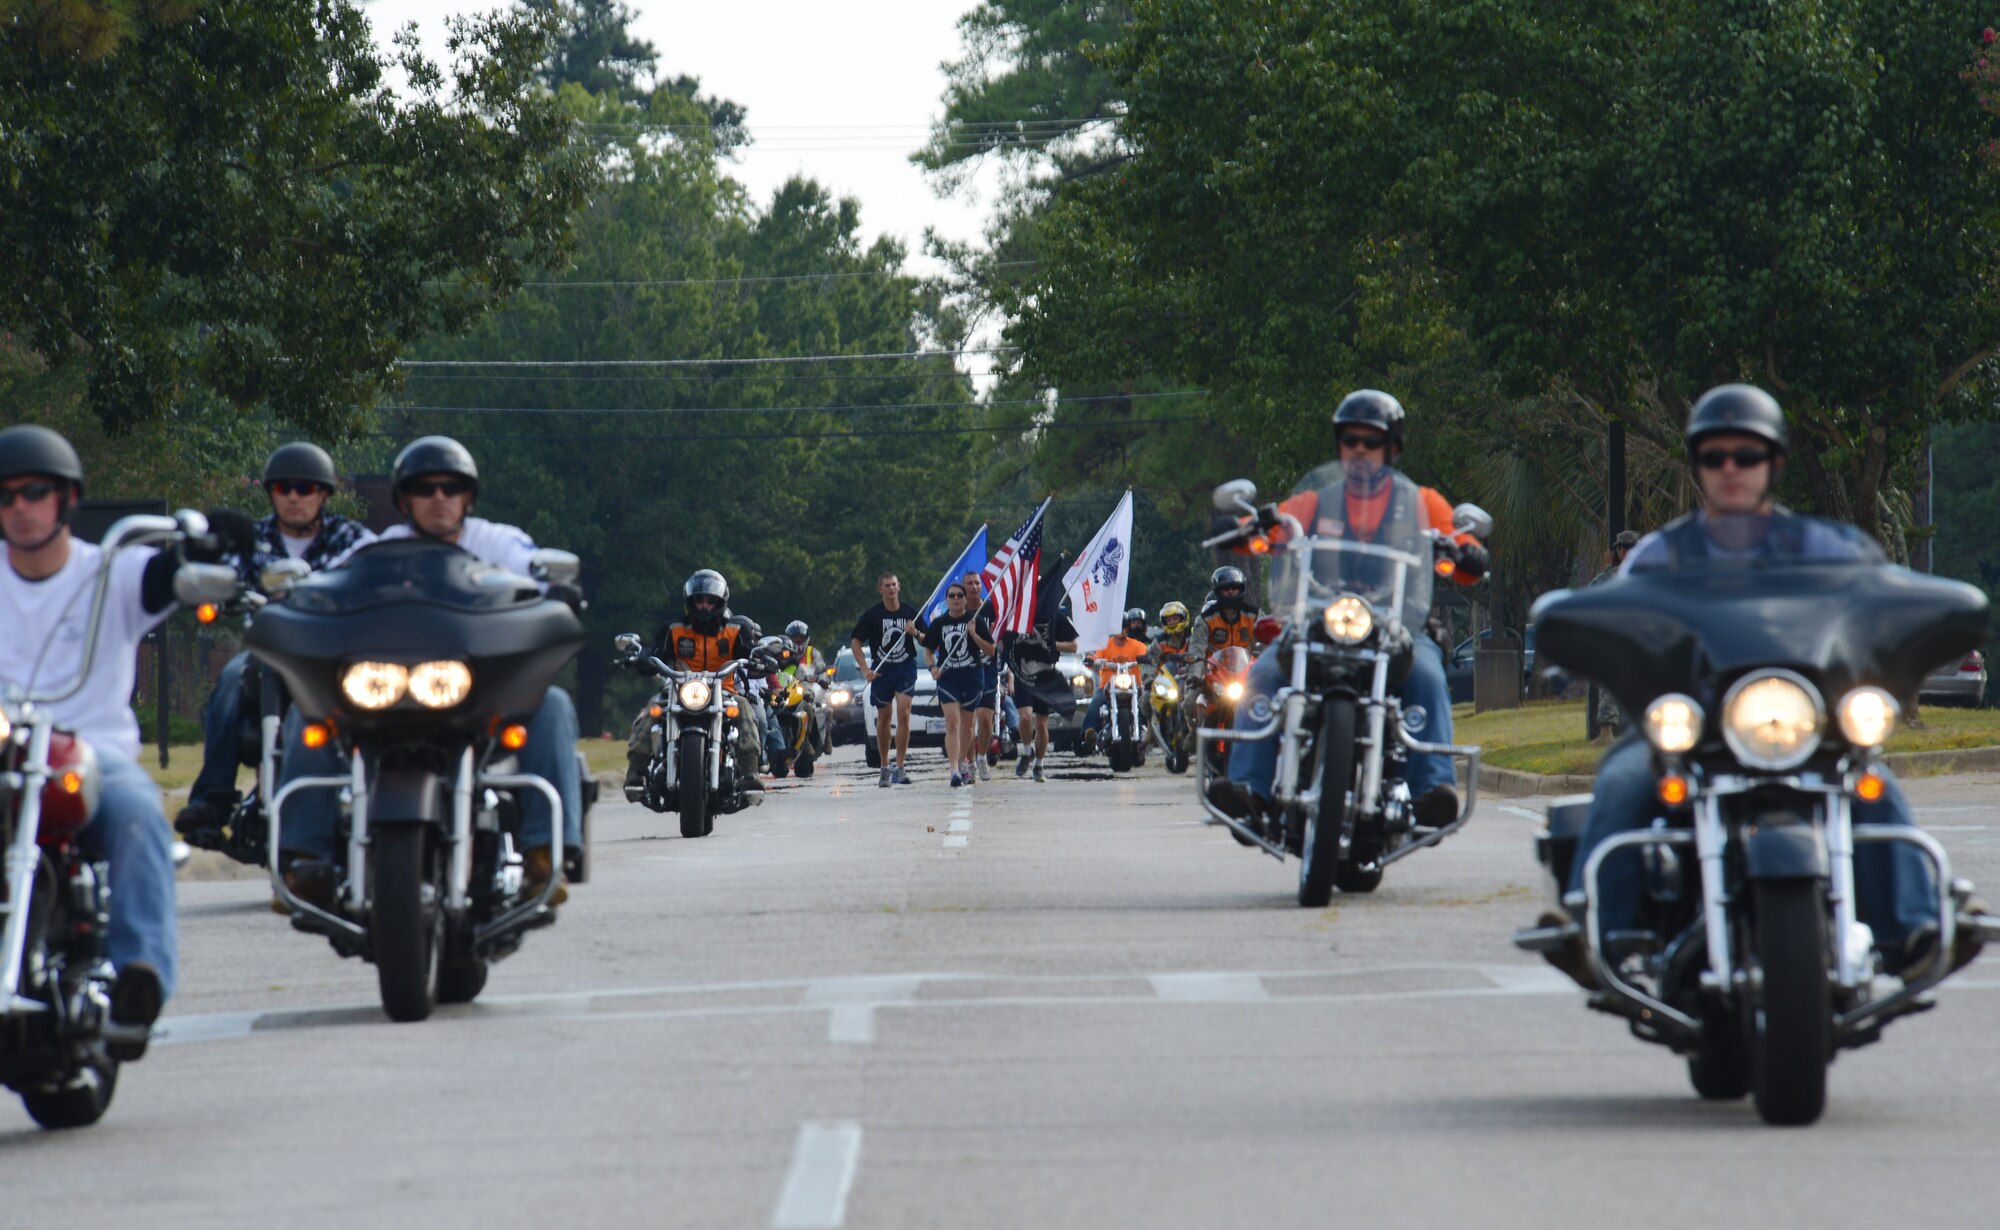 Motorcyclists escort the last of the runners from the 24-hour POW/MIA run at Shaw Air Force Base, S.C., Sept. 20, 2013. A POW/MIA Remembrance ceremony was held at Memorial Lake in honor of those Americans who have fallen, gone missing and/or become prisoners of war. (U.S. Air Force photo by Senior Airman Tabatha Zarrella/Released)
